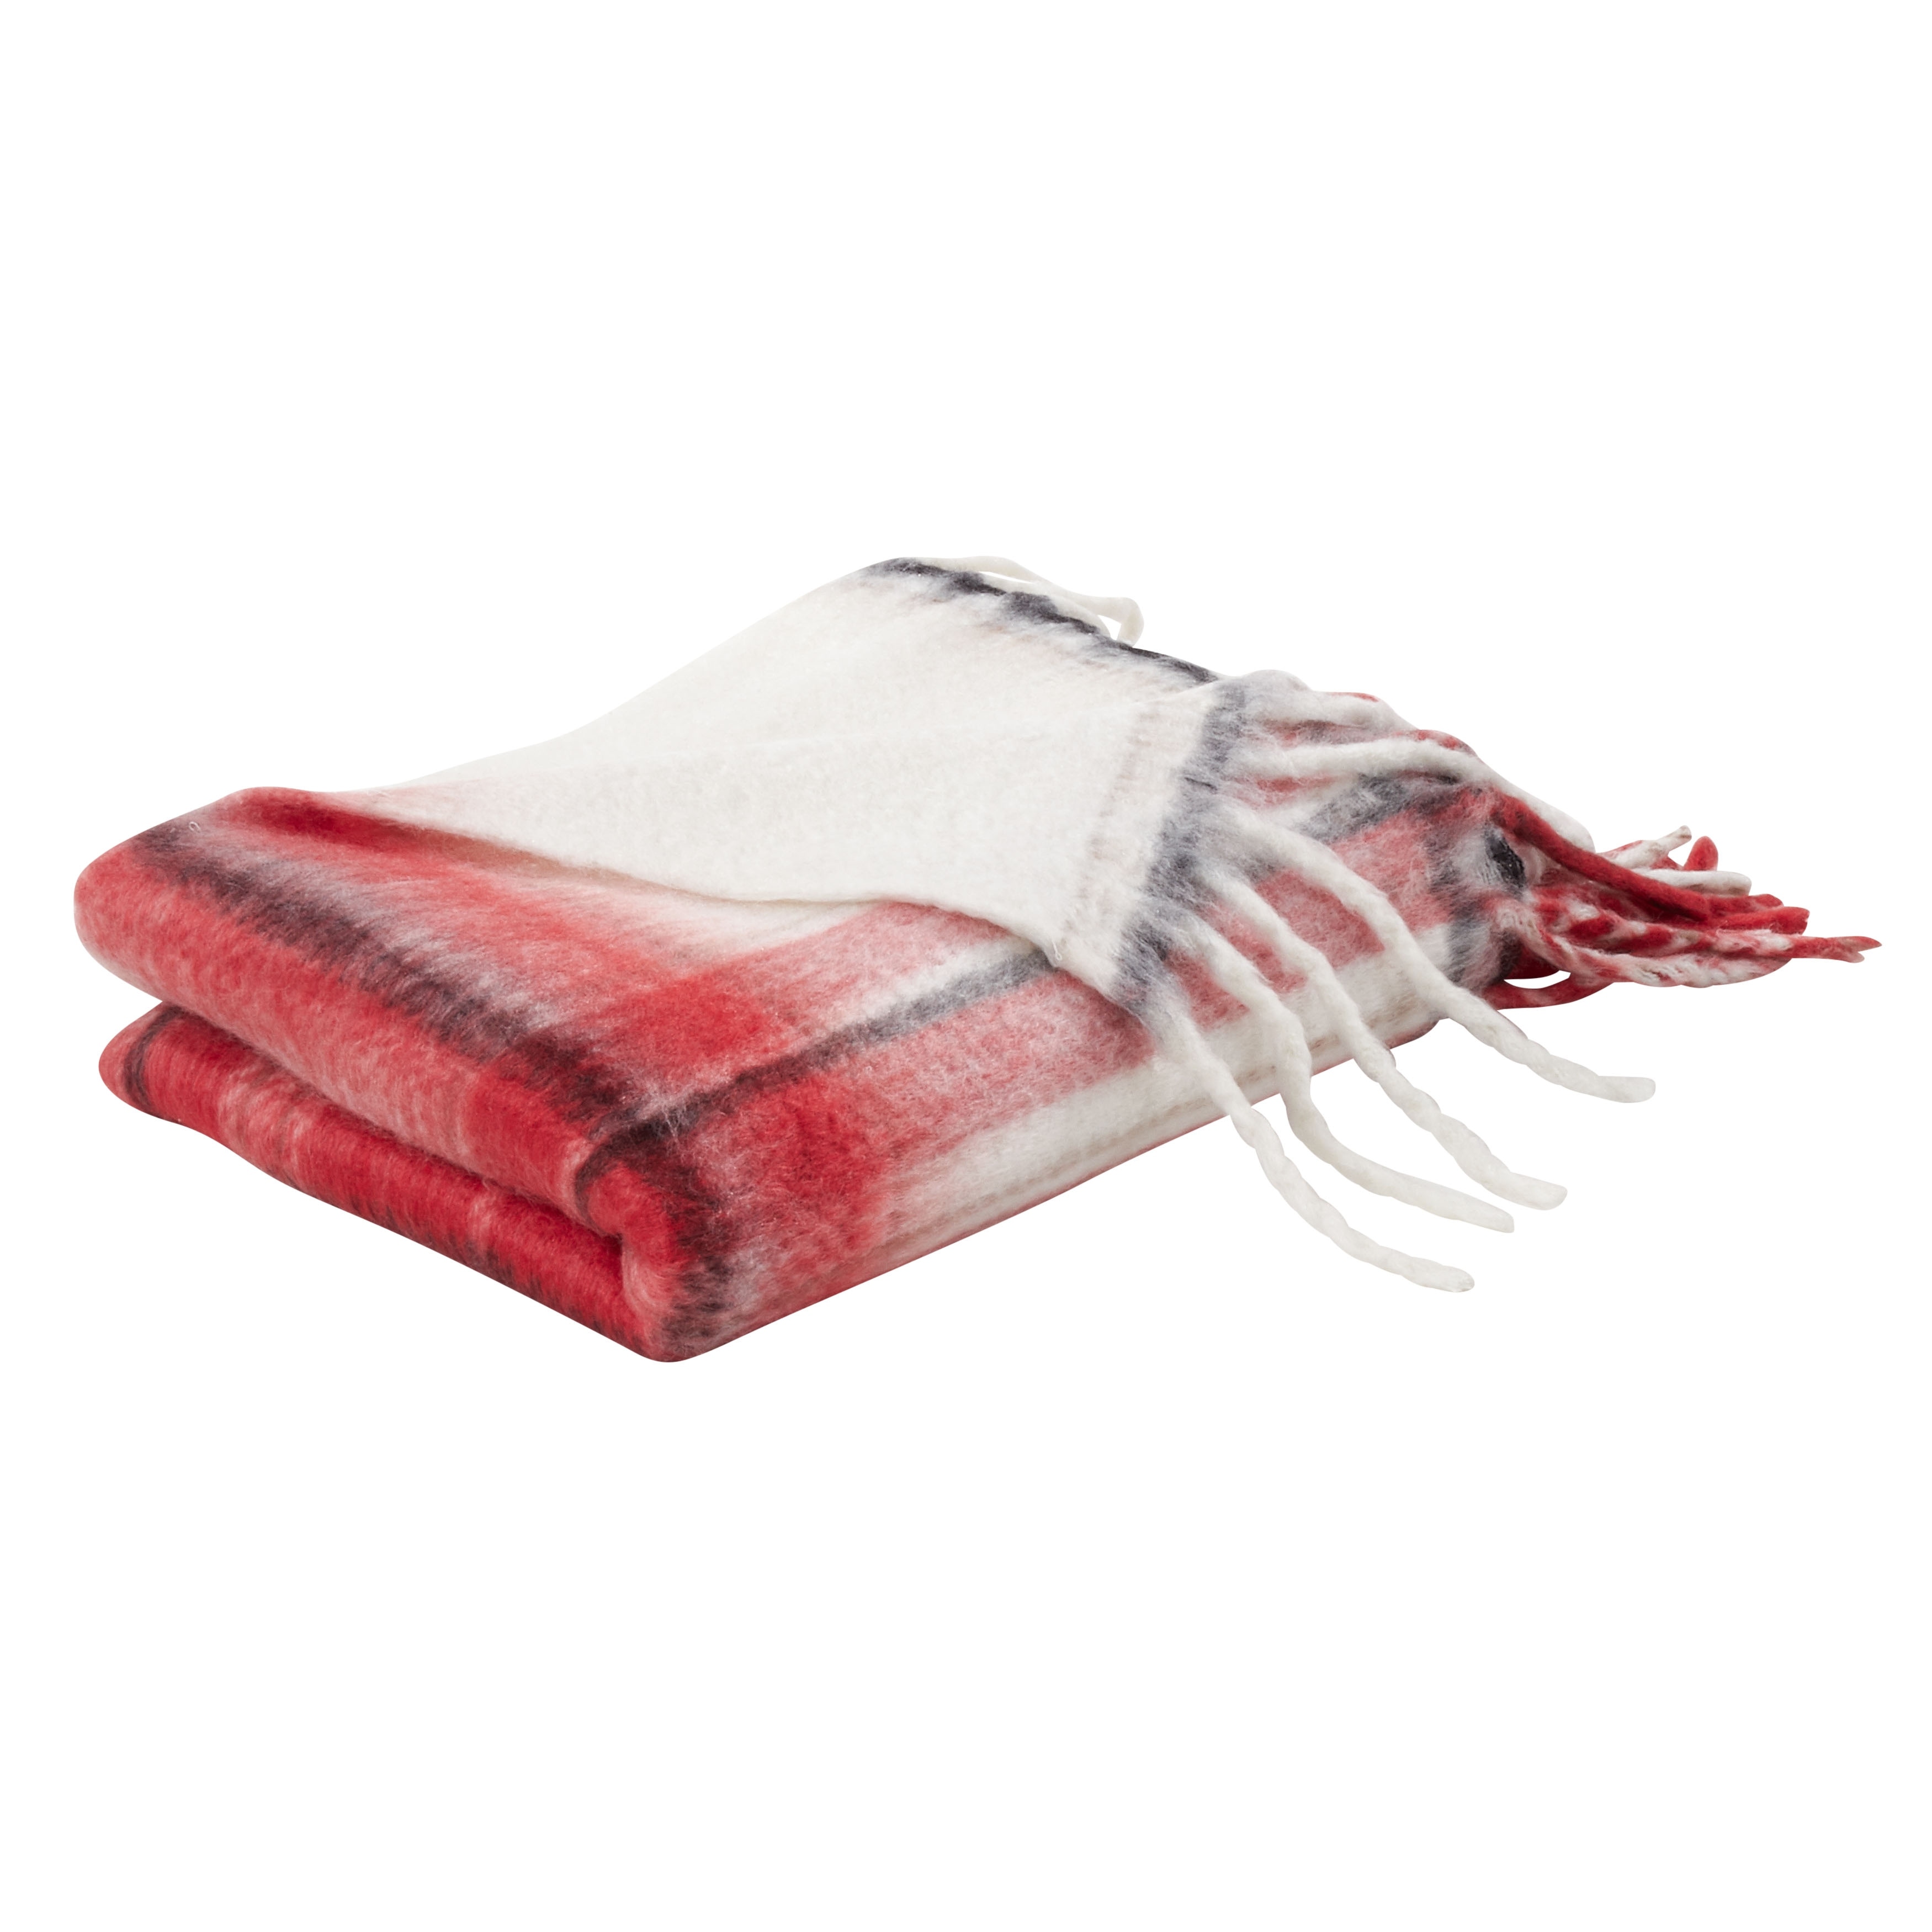 Acrylic Saro Lifestyle Blankets and Throws | Shop our Best Blankets ...